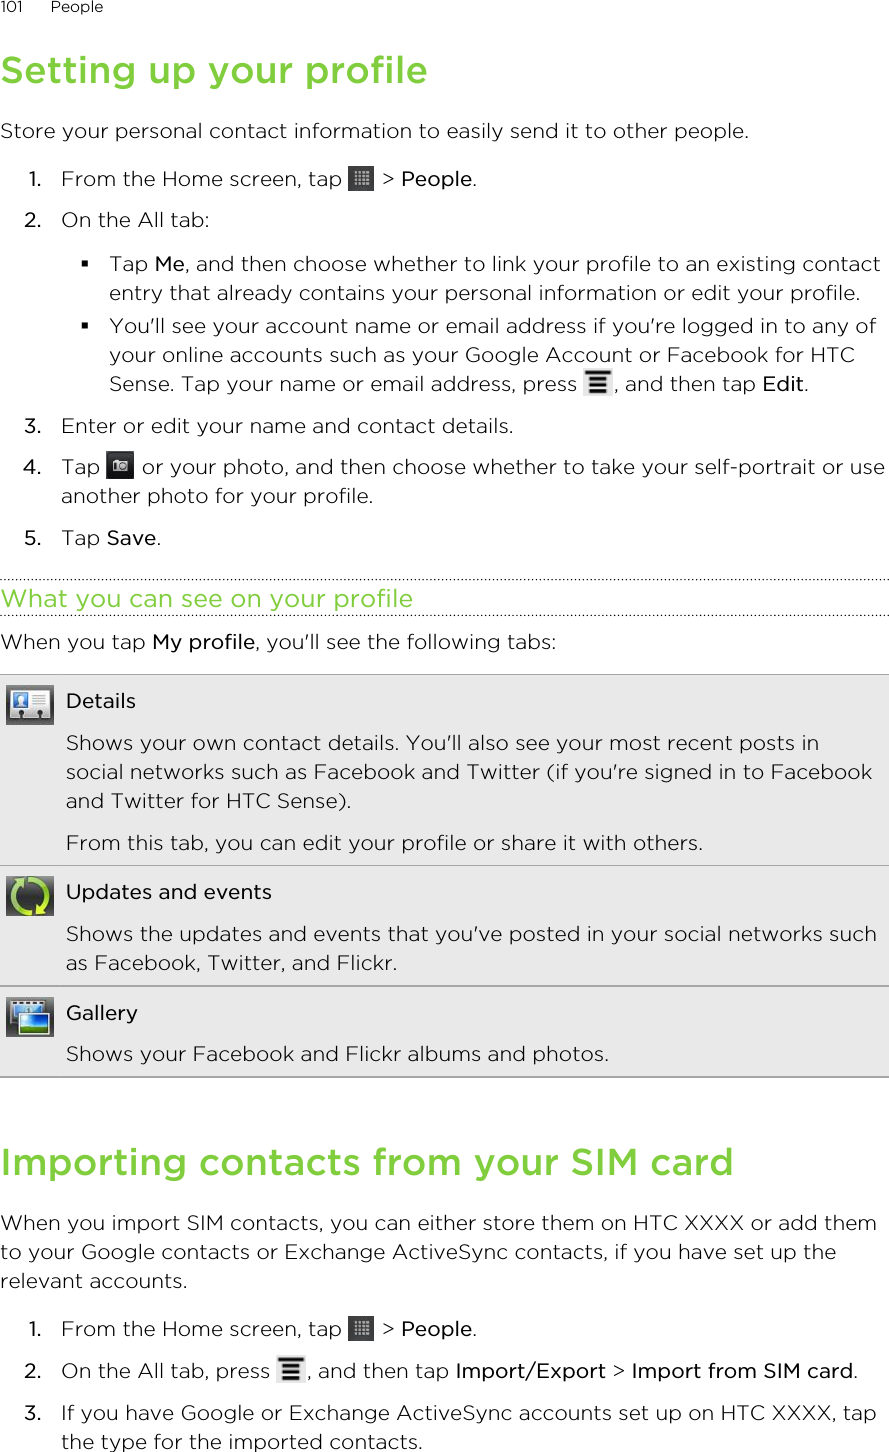 Setting up your profileStore your personal contact information to easily send it to other people.1. From the Home screen, tap   &gt; People.2. On the All tab:§Tap Me, and then choose whether to link your profile to an existing contactentry that already contains your personal information or edit your profile.§You&apos;ll see your account name or email address if you&apos;re logged in to any ofyour online accounts such as your Google Account or Facebook for HTCSense. Tap your name or email address, press  , and then tap Edit.3. Enter or edit your name and contact details.4. Tap   or your photo, and then choose whether to take your self-portrait or useanother photo for your profile.5. Tap Save.What you can see on your profileWhen you tap My profile, you&apos;ll see the following tabs:DetailsShows your own contact details. You&apos;ll also see your most recent posts insocial networks such as Facebook and Twitter (if you&apos;re signed in to Facebookand Twitter for HTC Sense).From this tab, you can edit your profile or share it with others.Updates and eventsShows the updates and events that you&apos;ve posted in your social networks suchas Facebook, Twitter, and Flickr.GalleryShows your Facebook and Flickr albums and photos.Importing contacts from your SIM cardWhen you import SIM contacts, you can either store them on HTC XXXX or add themto your Google contacts or Exchange ActiveSync contacts, if you have set up therelevant accounts.1. From the Home screen, tap   &gt; People.2. On the All tab, press  , and then tap Import/Export &gt; Import from SIM card.3. If you have Google or Exchange ActiveSync accounts set up on HTC XXXX, tapthe type for the imported contacts.101 People